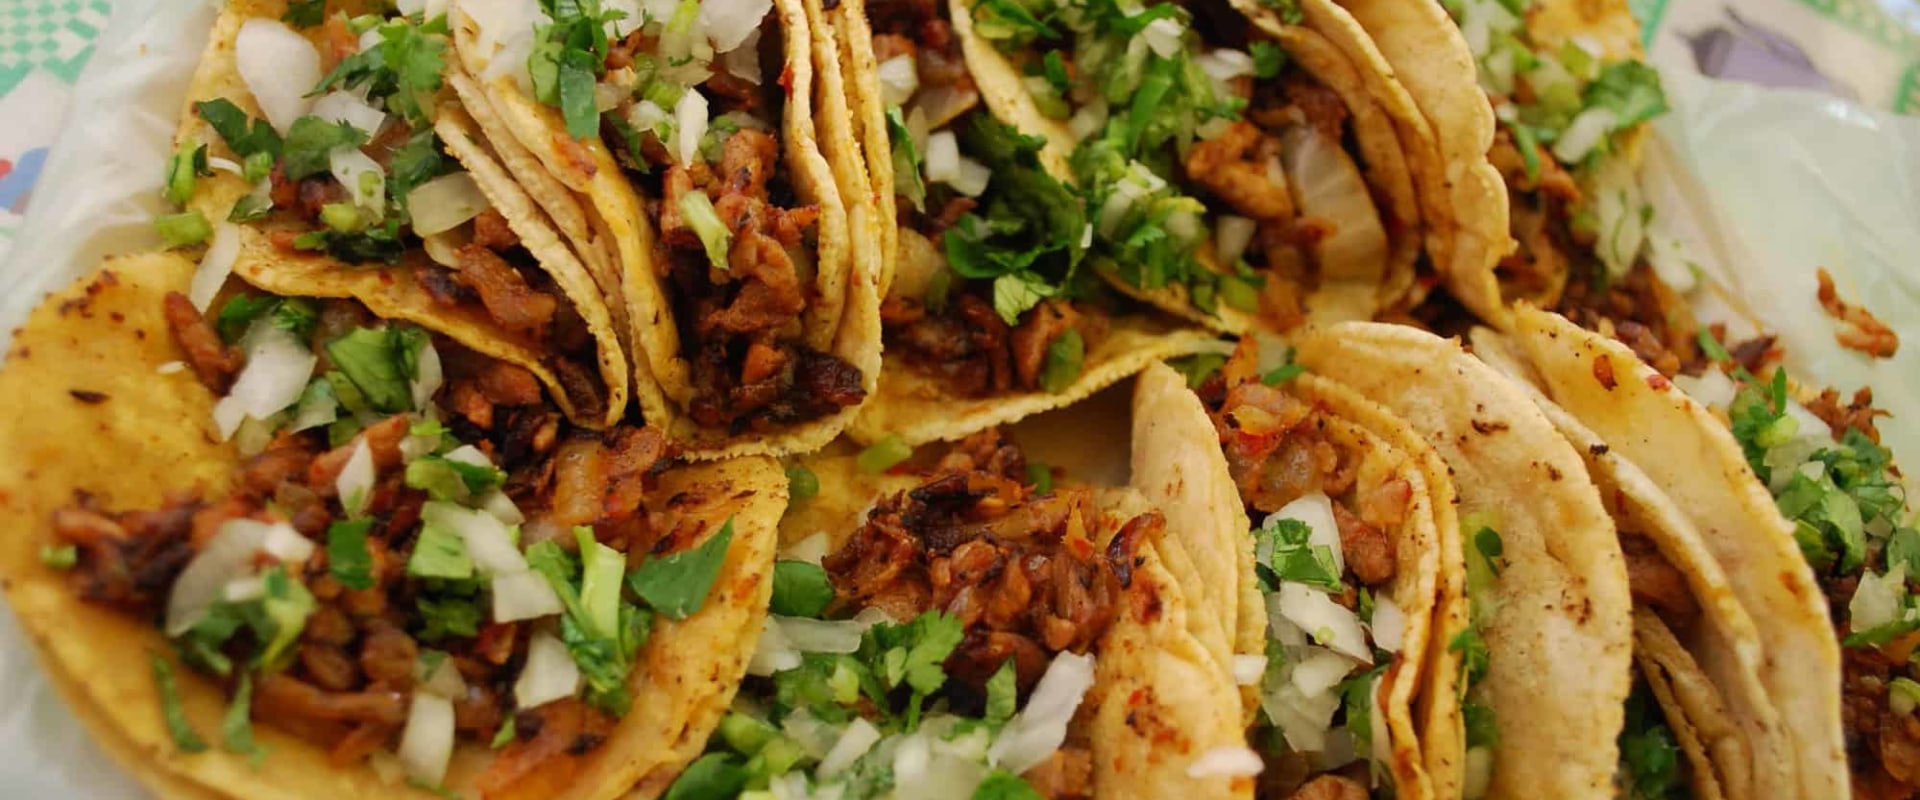 What are the best mexican restaurants in central arizona?